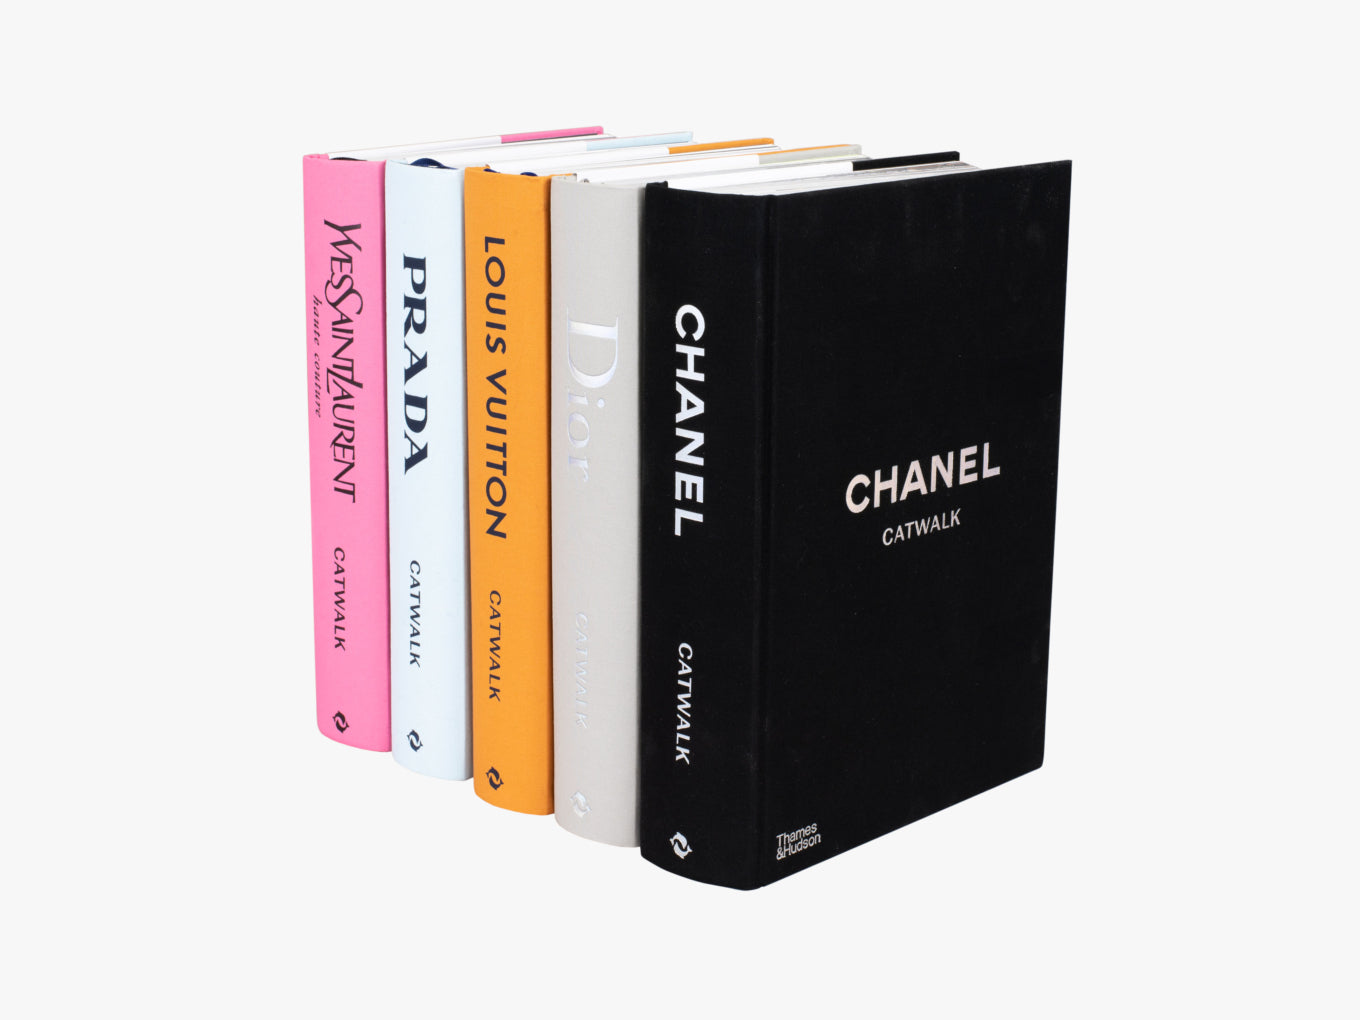 Chanel Catwalk Complete Collections coffee table book限量版收藏書